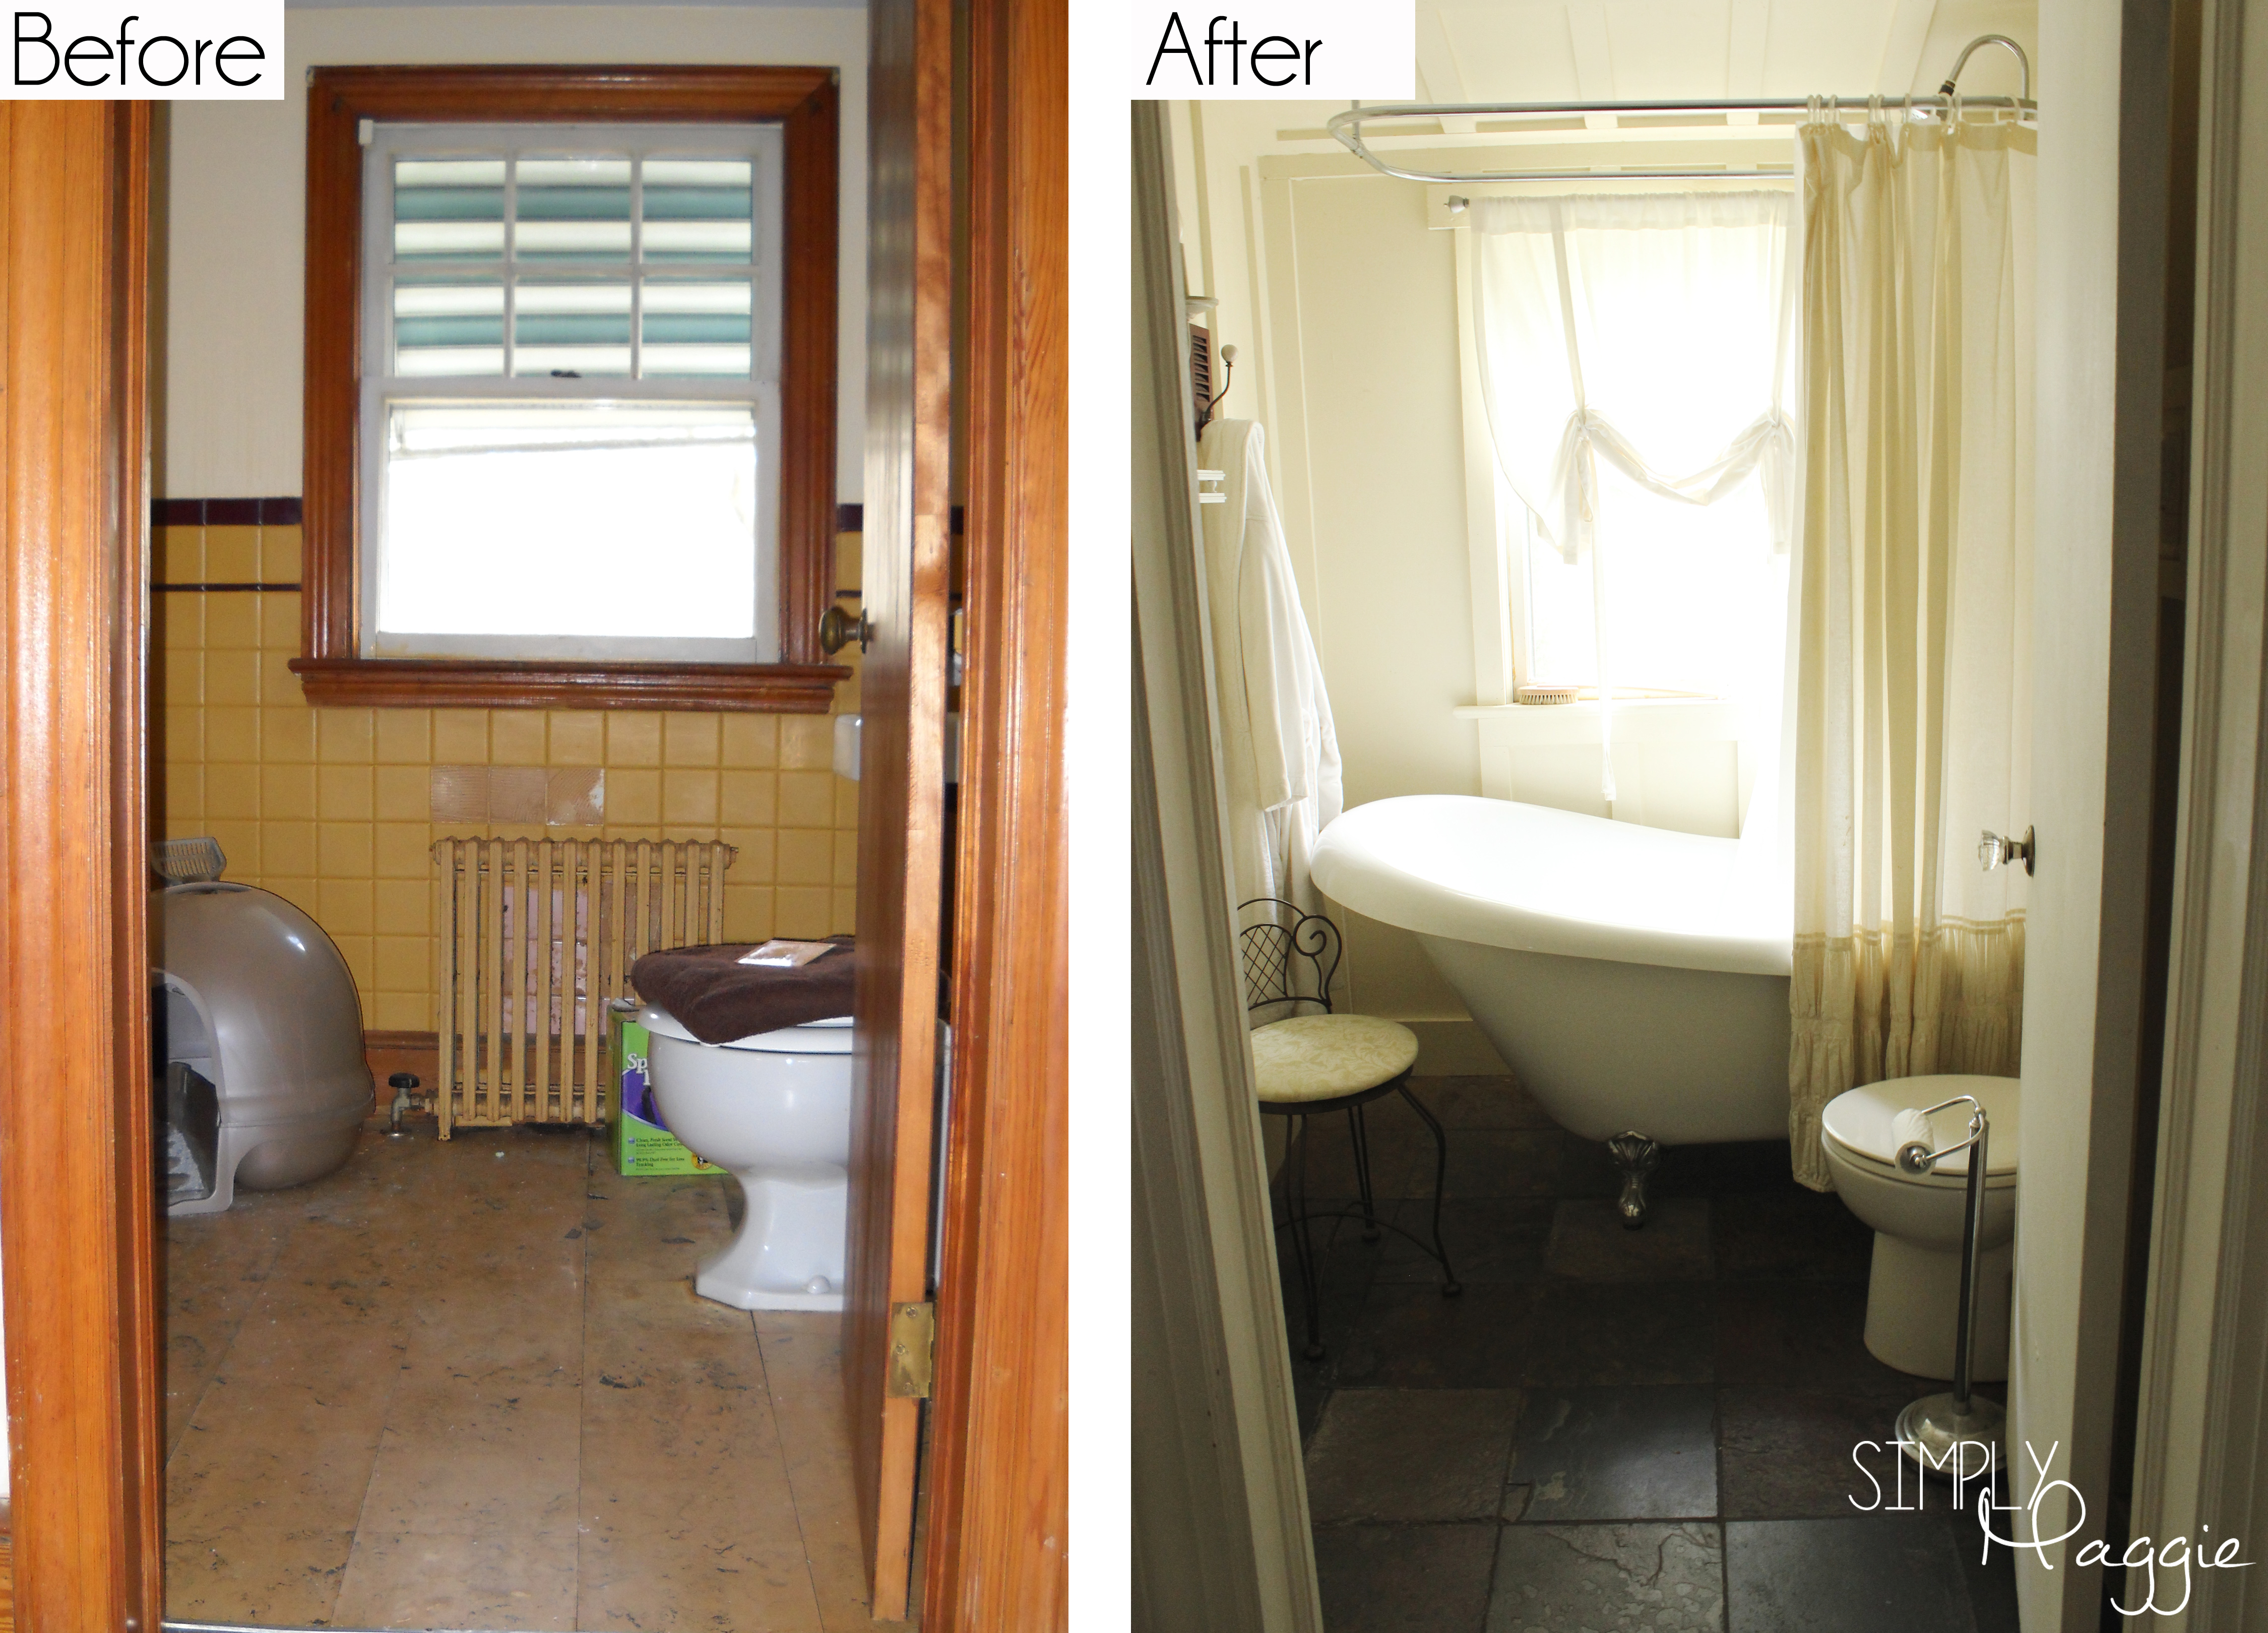 Cottage Bathroom Renovation Before And, Bathroom Remodels Before And After Photos